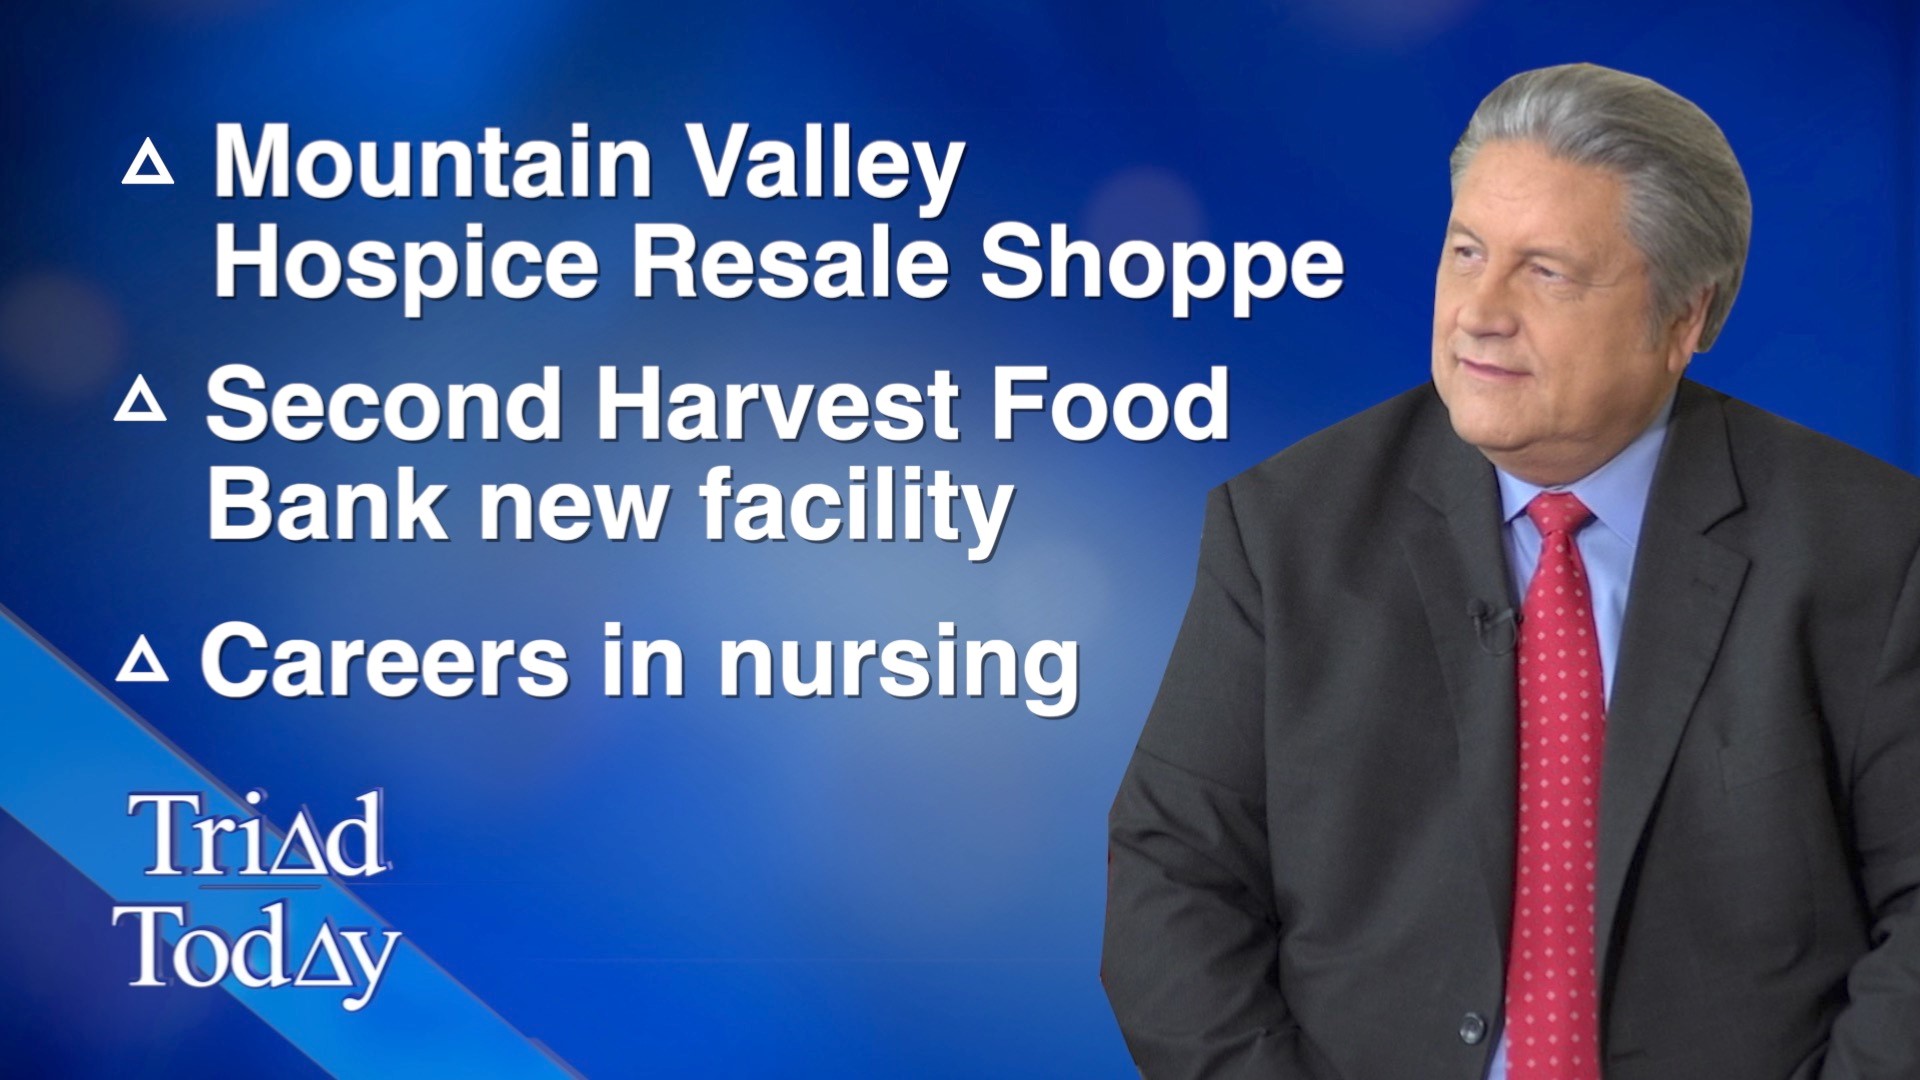 Mountain Valley Hospice opens a resale shoppe, Second Harvest Food Bank opens a new facility, careers in nursing, and holiday safety tips.